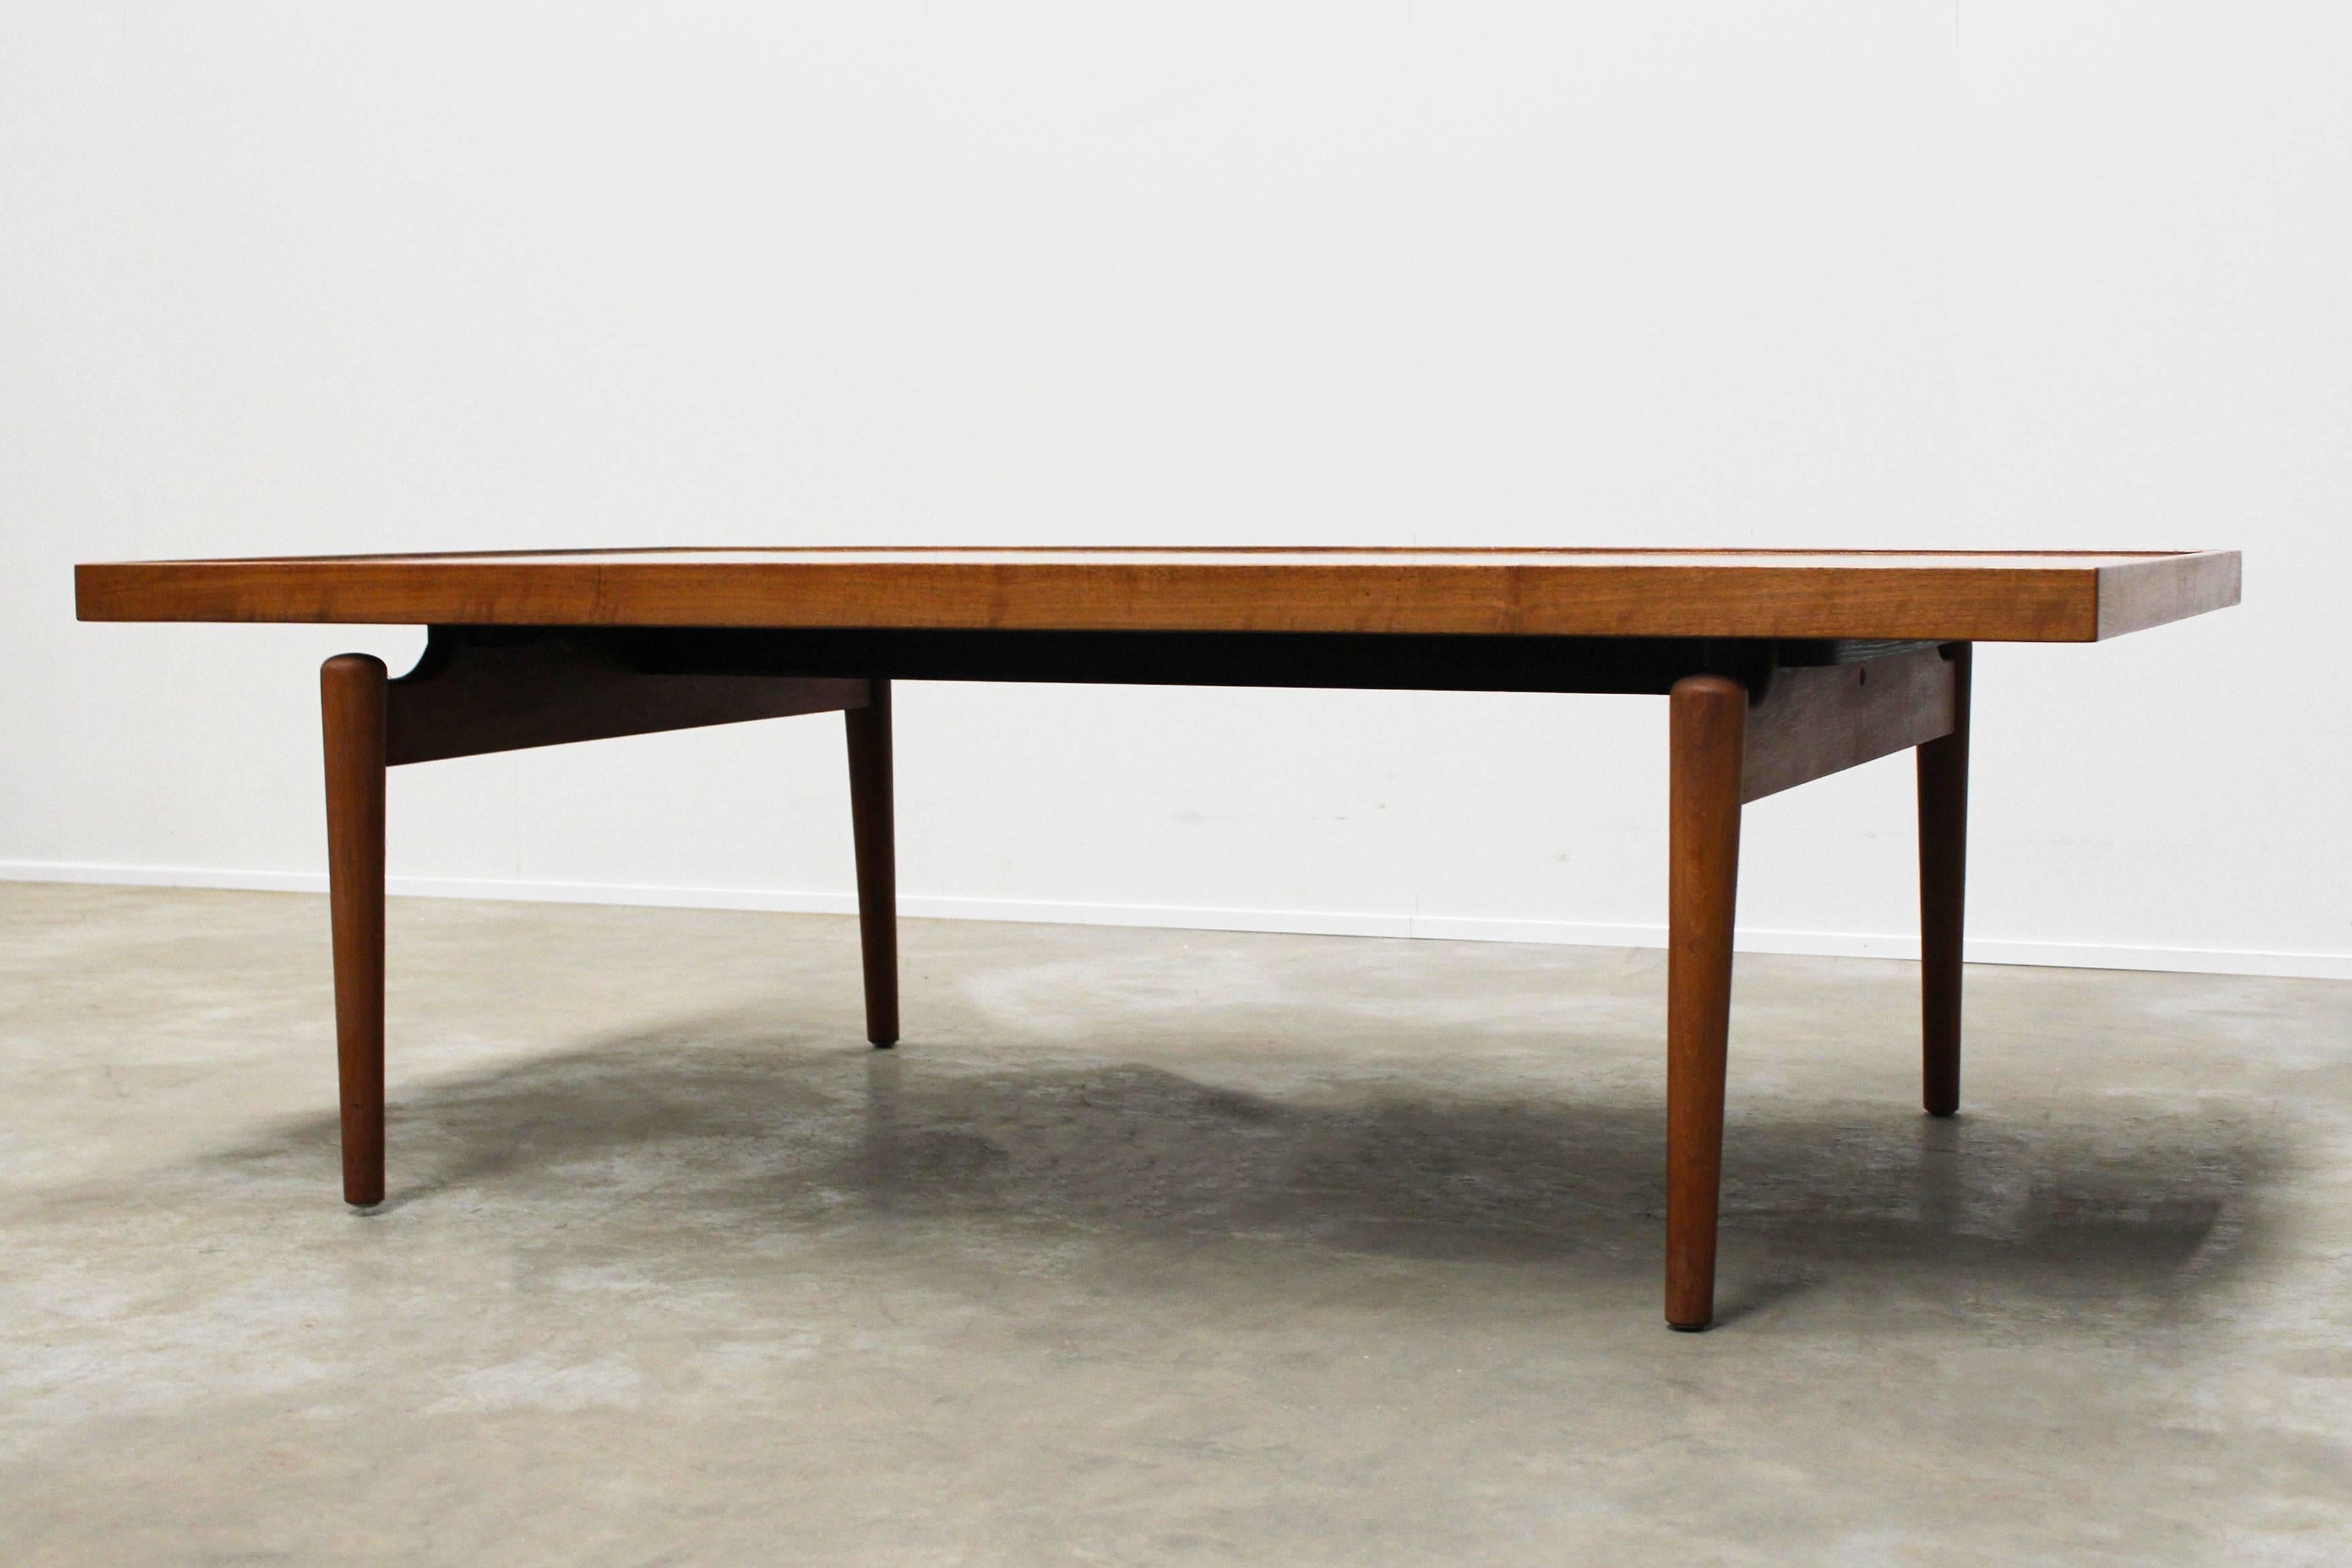 Midcentury Large Sculpted Metal and Teak Coffee Table by Heinz Lilienthal, 1970 For Sale 2